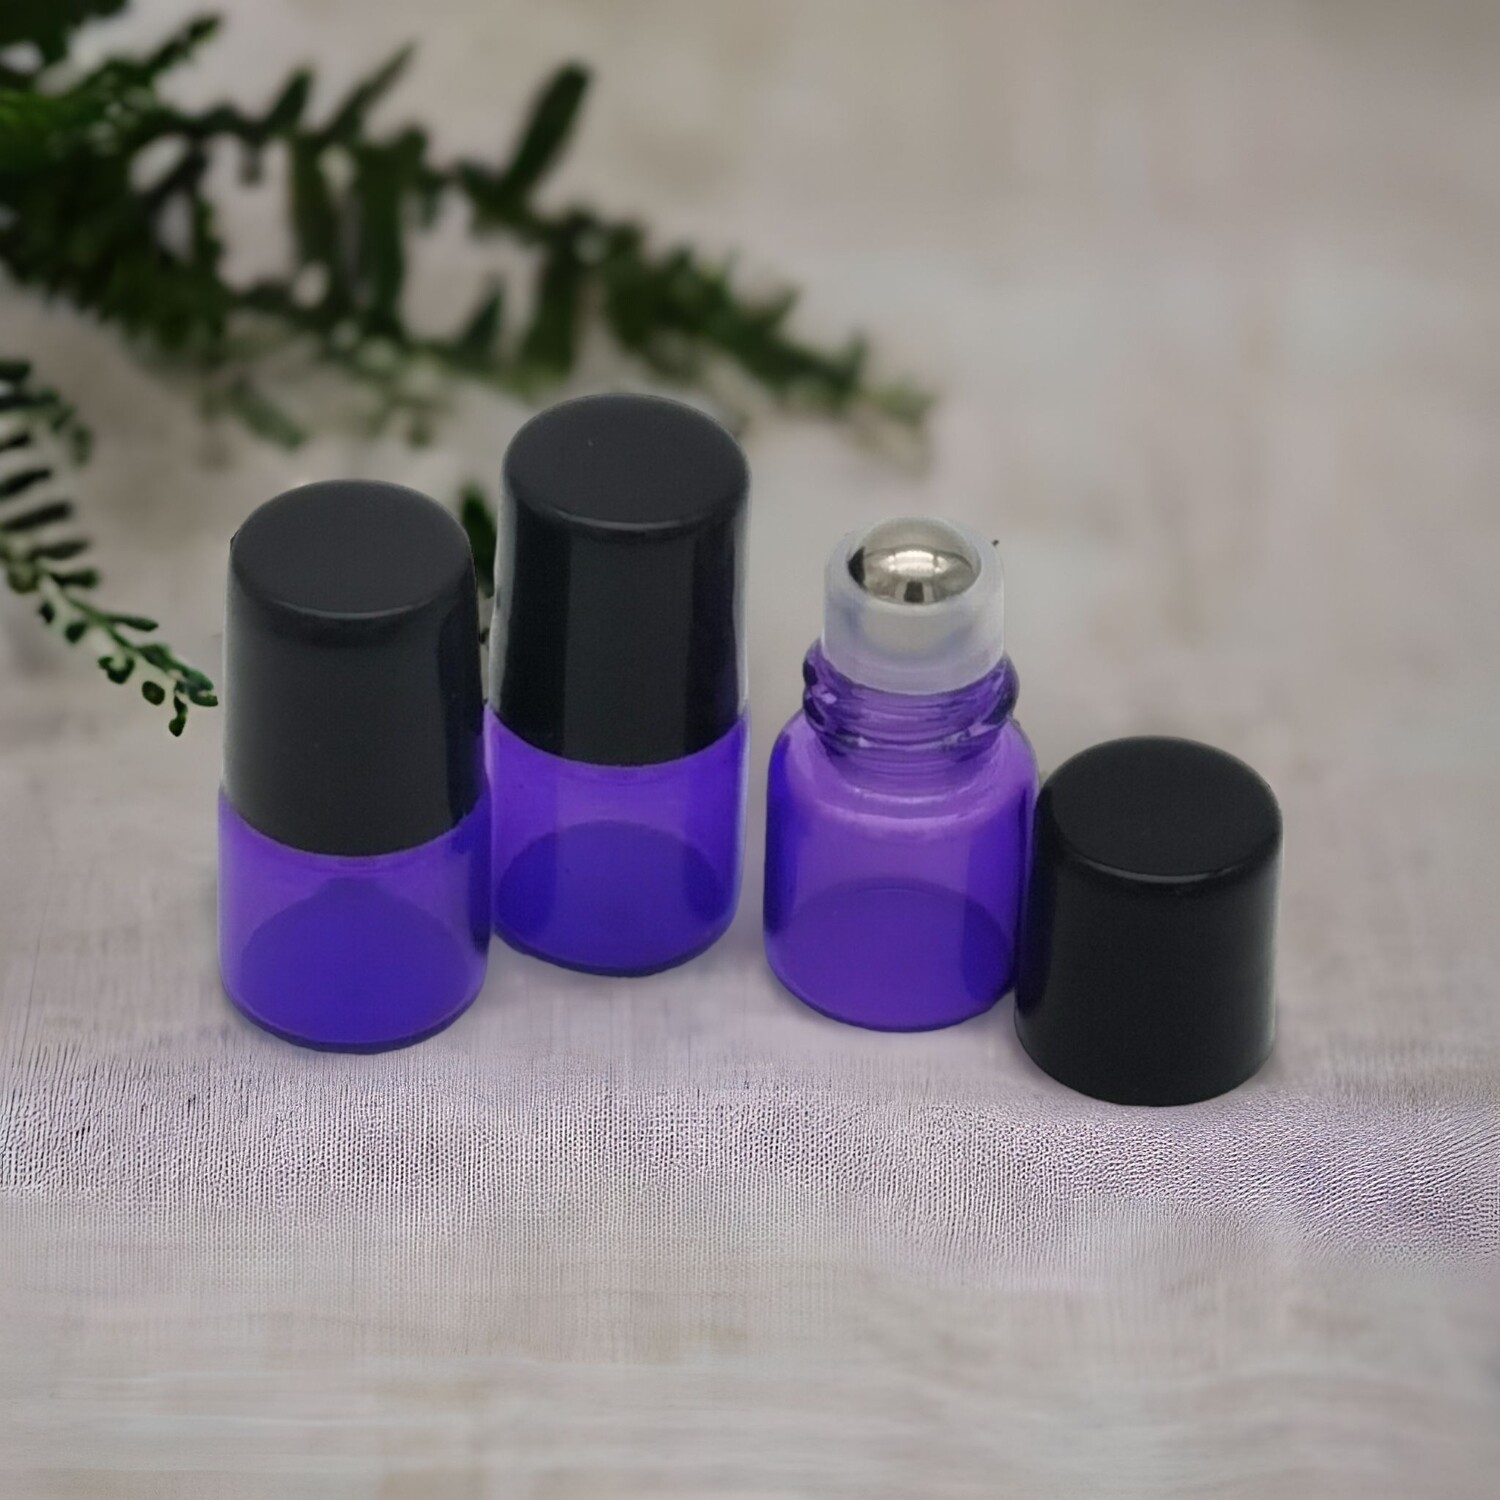 1ml Cobalt Blue (Violet/Blue) Glass Rollon with Metal Roller Ball (White Housing) and Black Cap - PACK of 100 Pcs